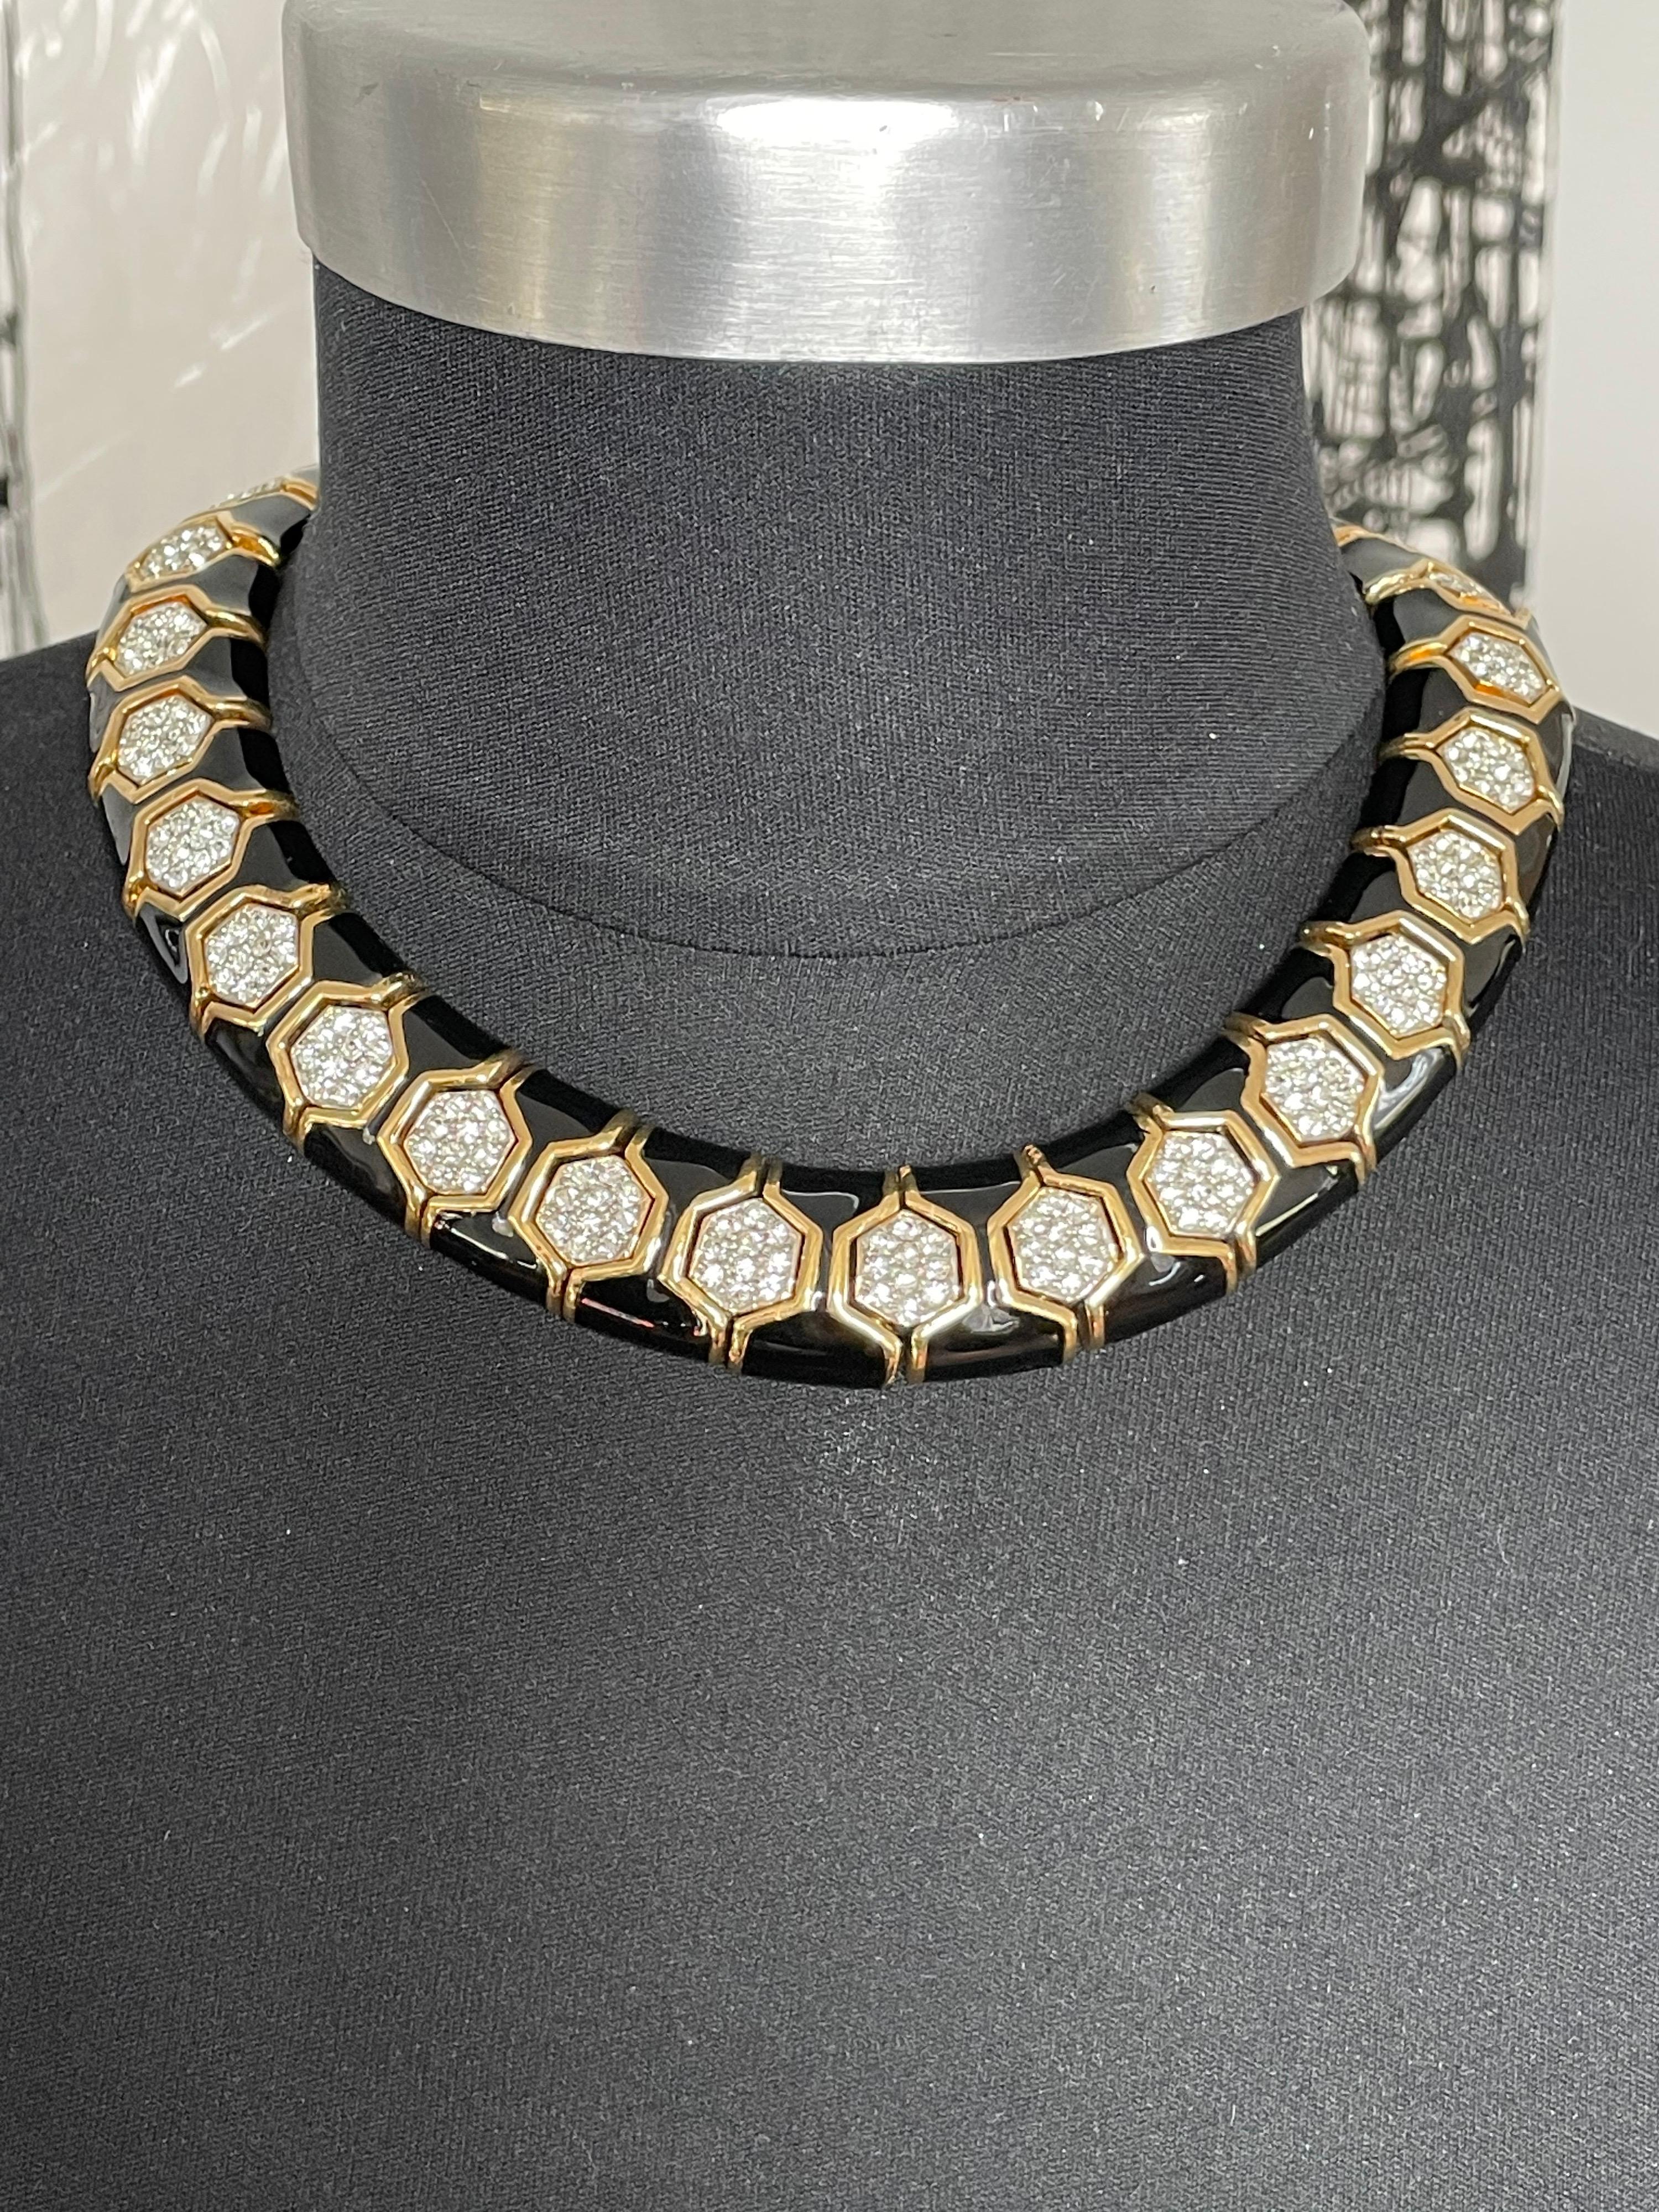  Ciner Enamel and Swarovski Crystal Choker Necklace New, Never Worn  In New Condition For Sale In Wallkill, NY